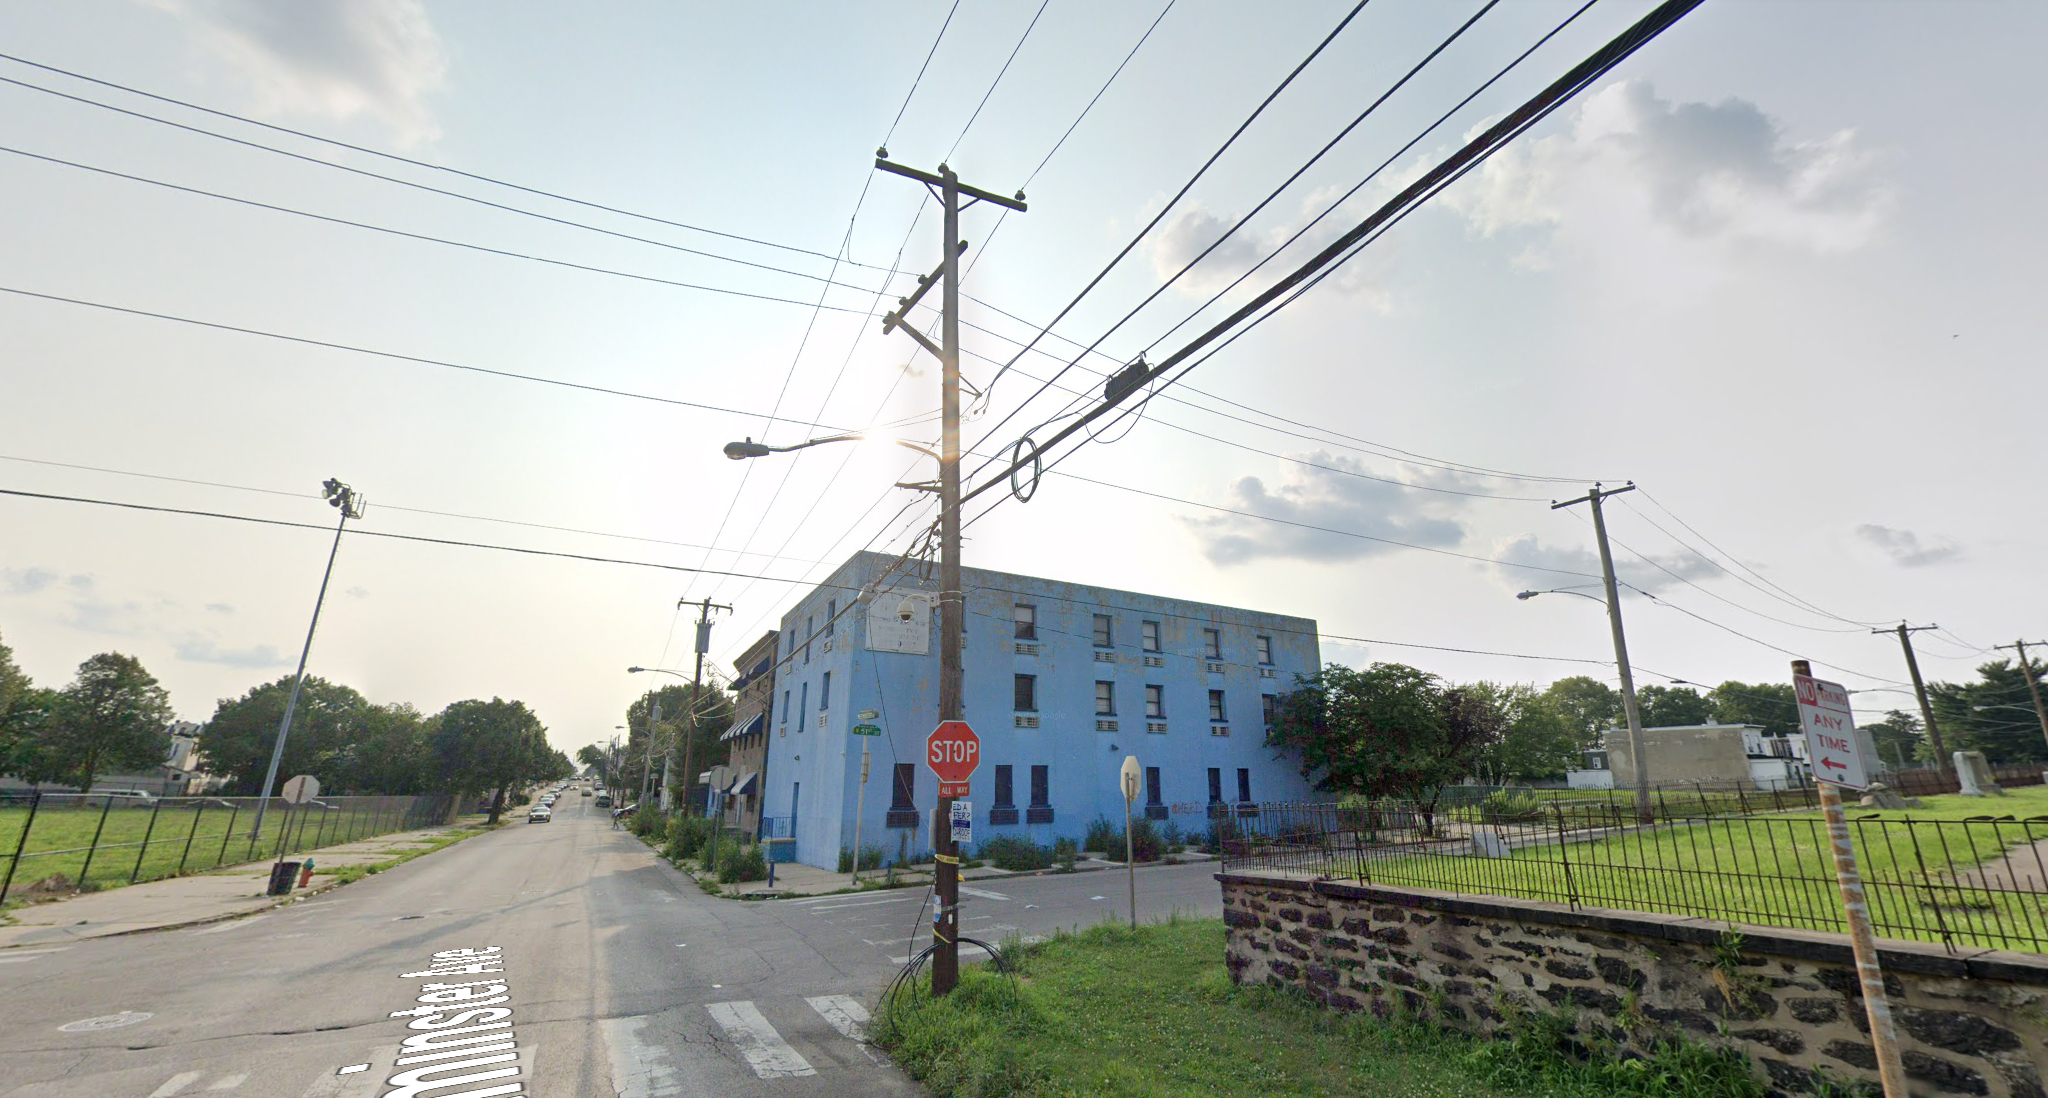 View of 916 North 51st Street. Credit: Google.